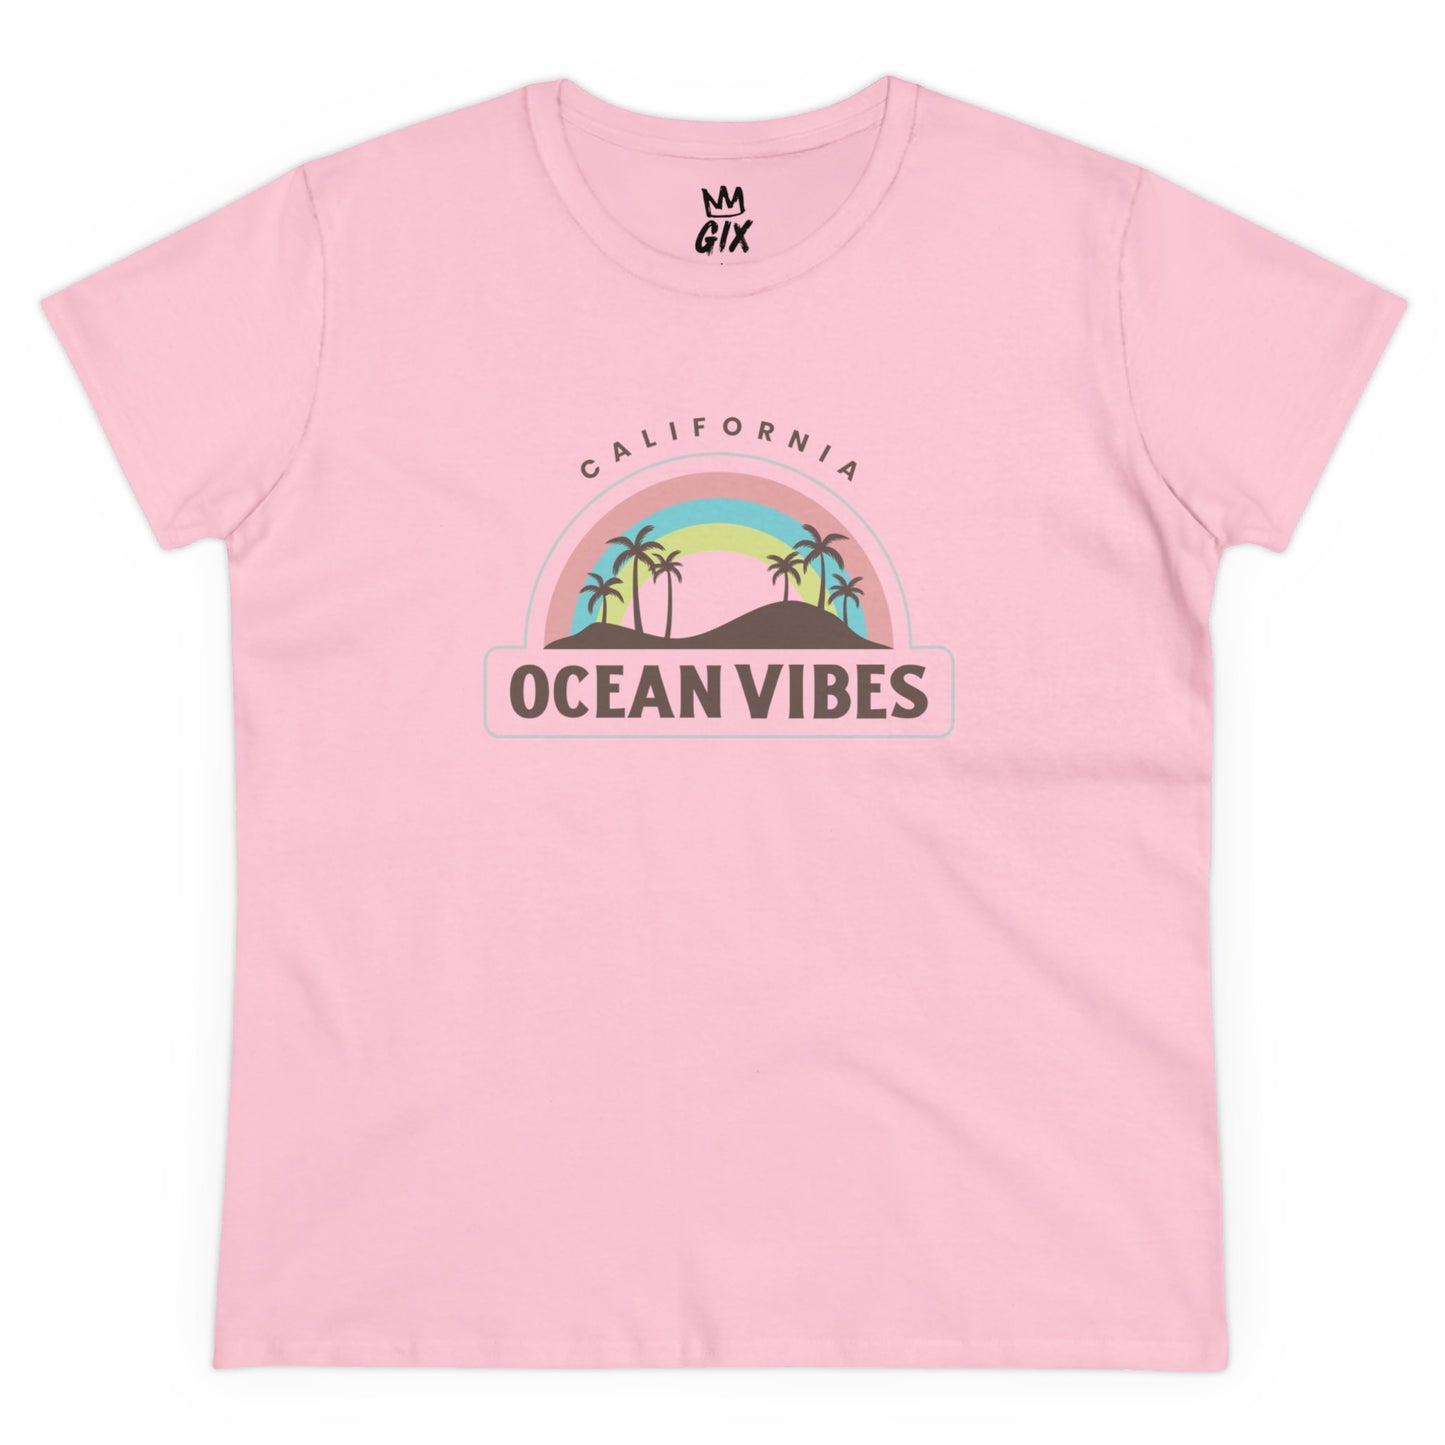 Ocean Vibes Women's Beach T-Shirt - 100% Cotton, Semi-Fitted, Soft and Comfy